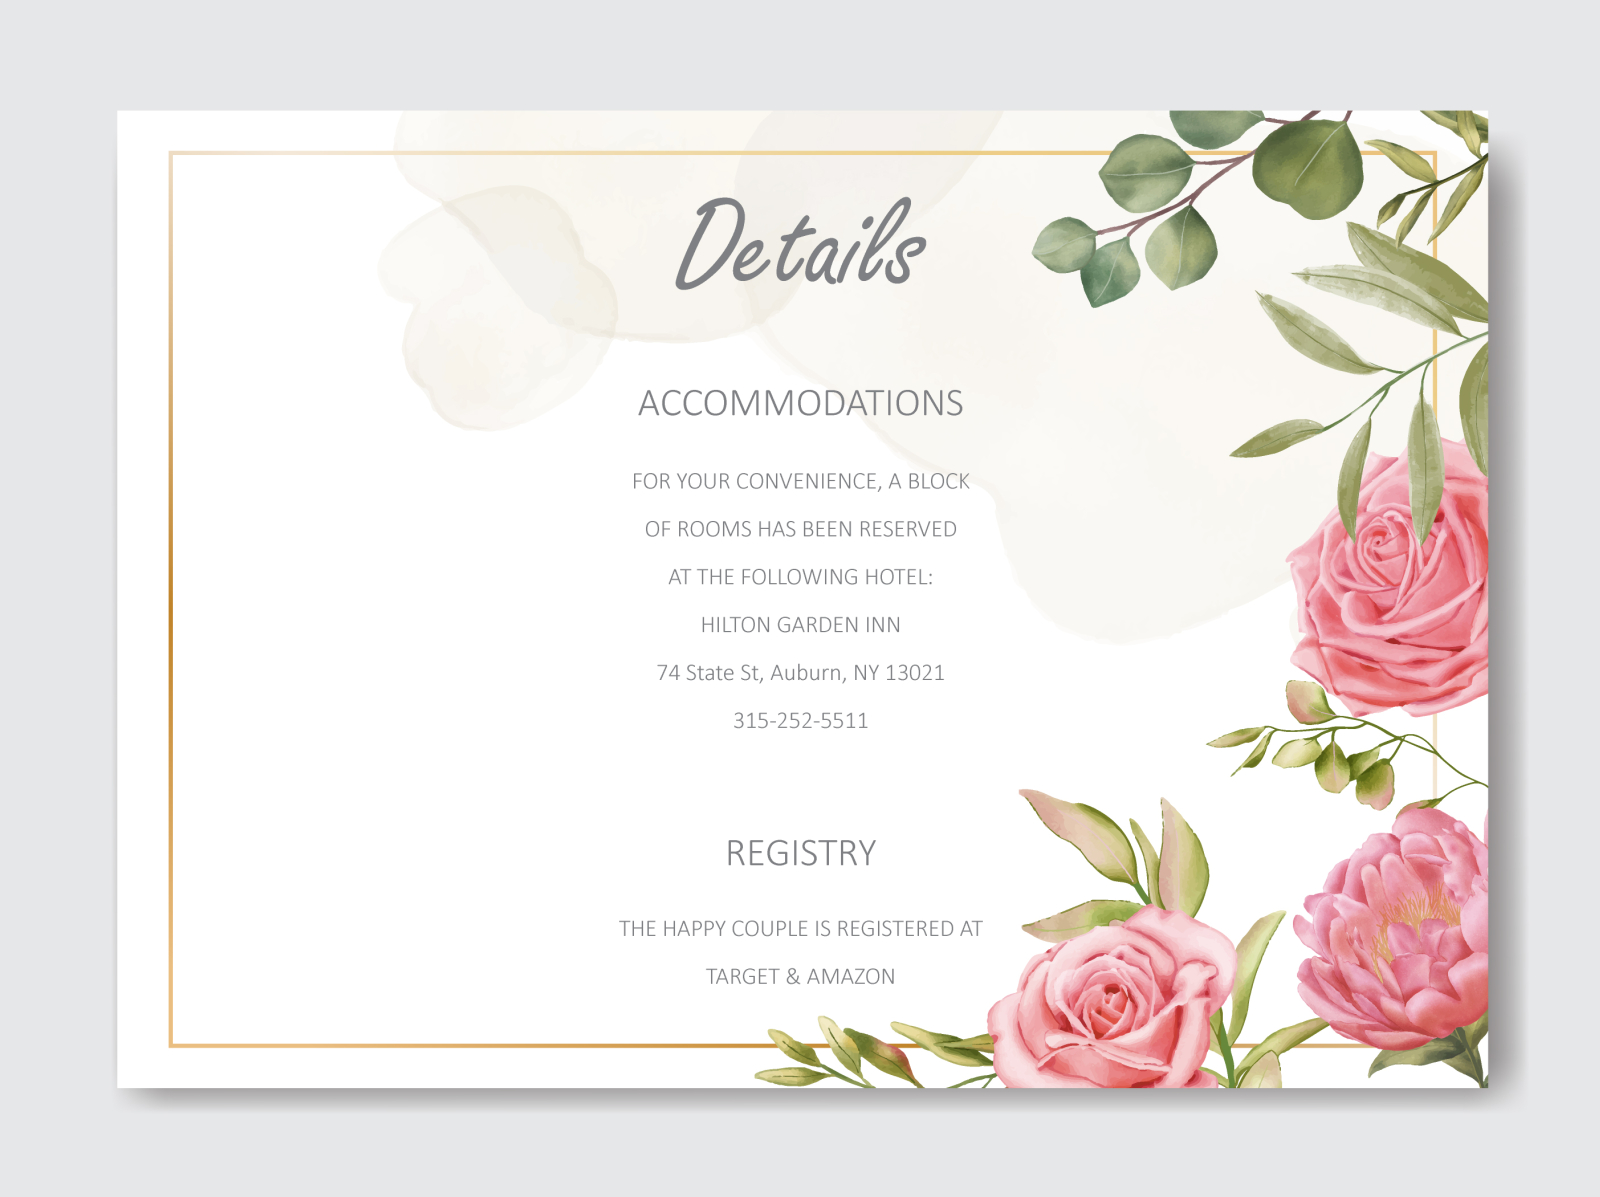 Wedding Invitation With Floral Ornament And Gold Frame By Dheo